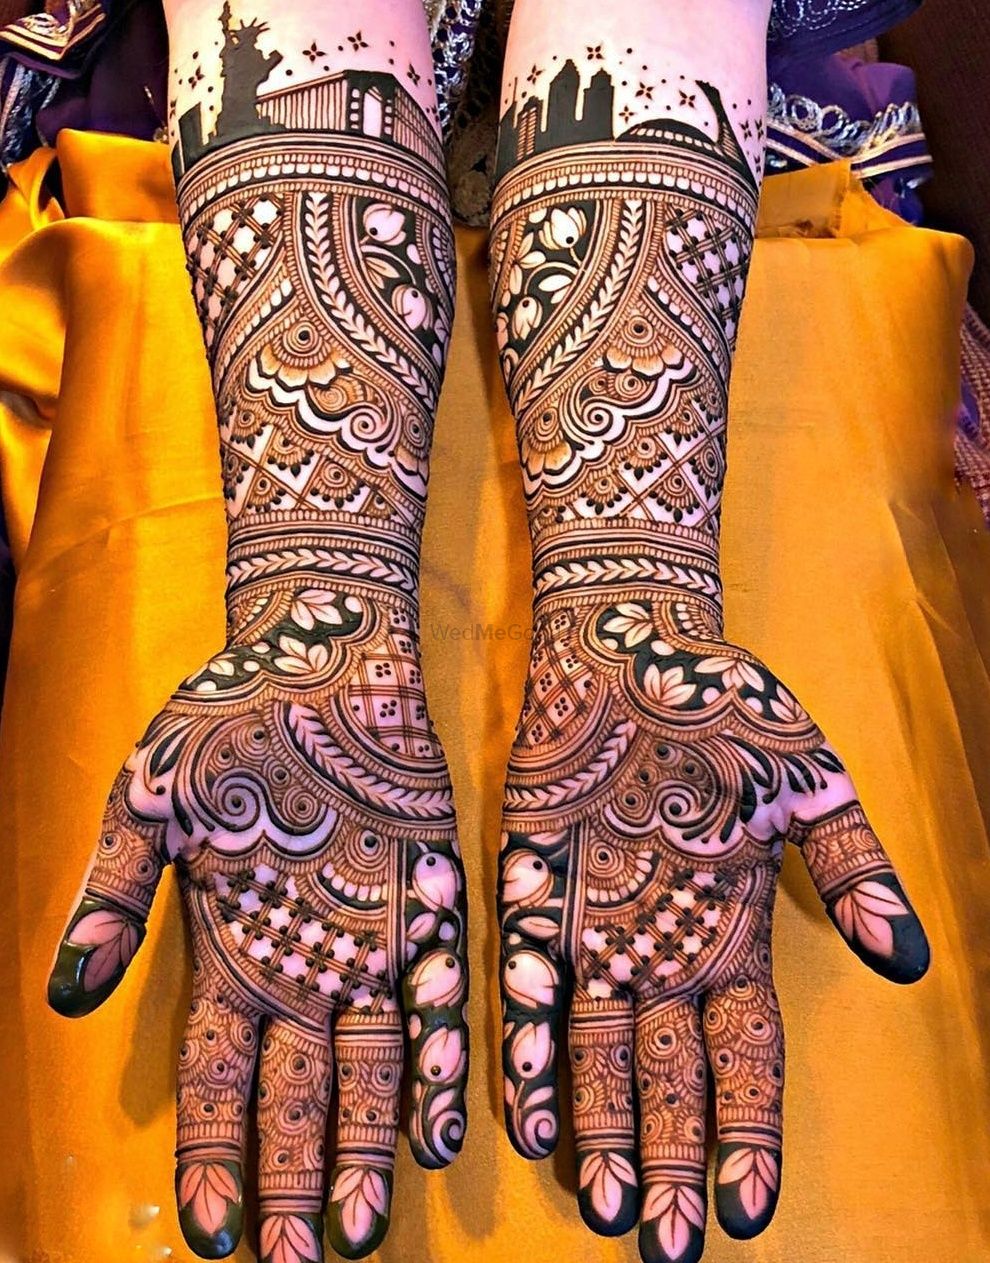 Photo From Bridal Hands Designs - By NS Mehendi Artist